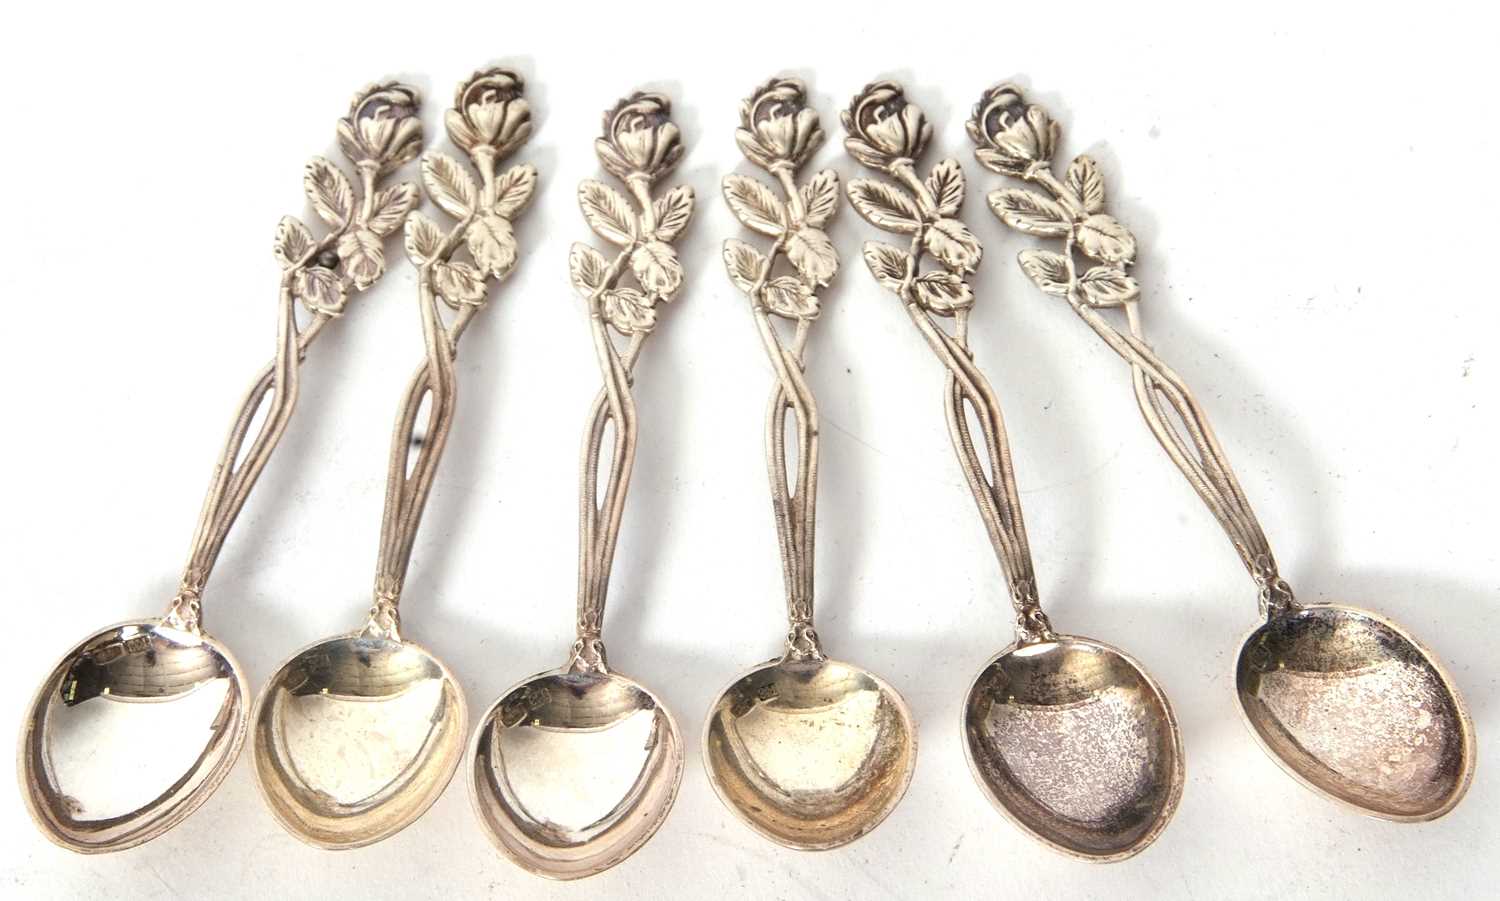 A cased set of six silver Russian teaspoons with decorative floral and leaf handles, the bowls